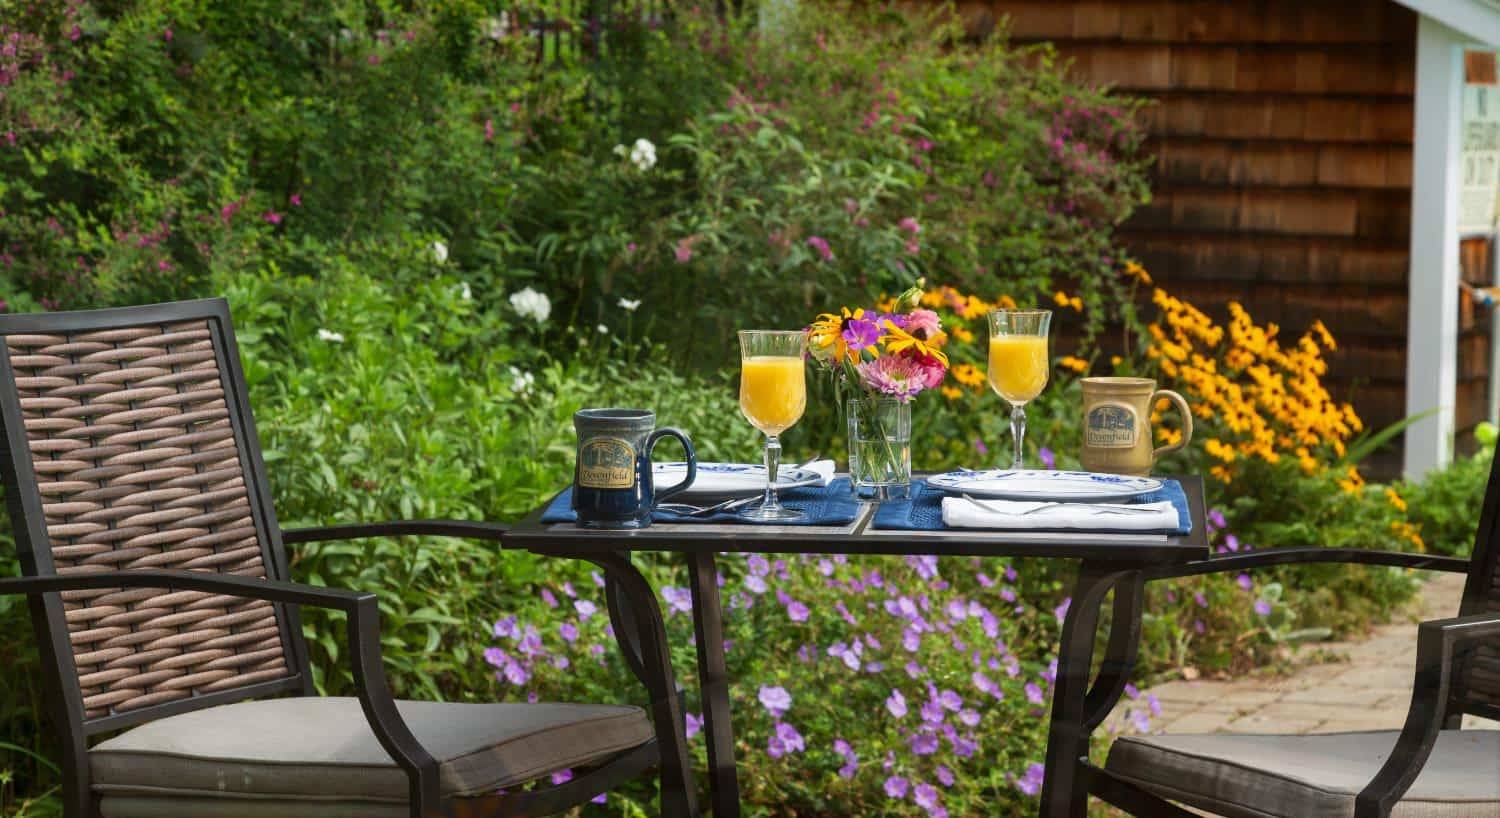 Small patio table with two chairs and colorful flowers and green vegetation in the background